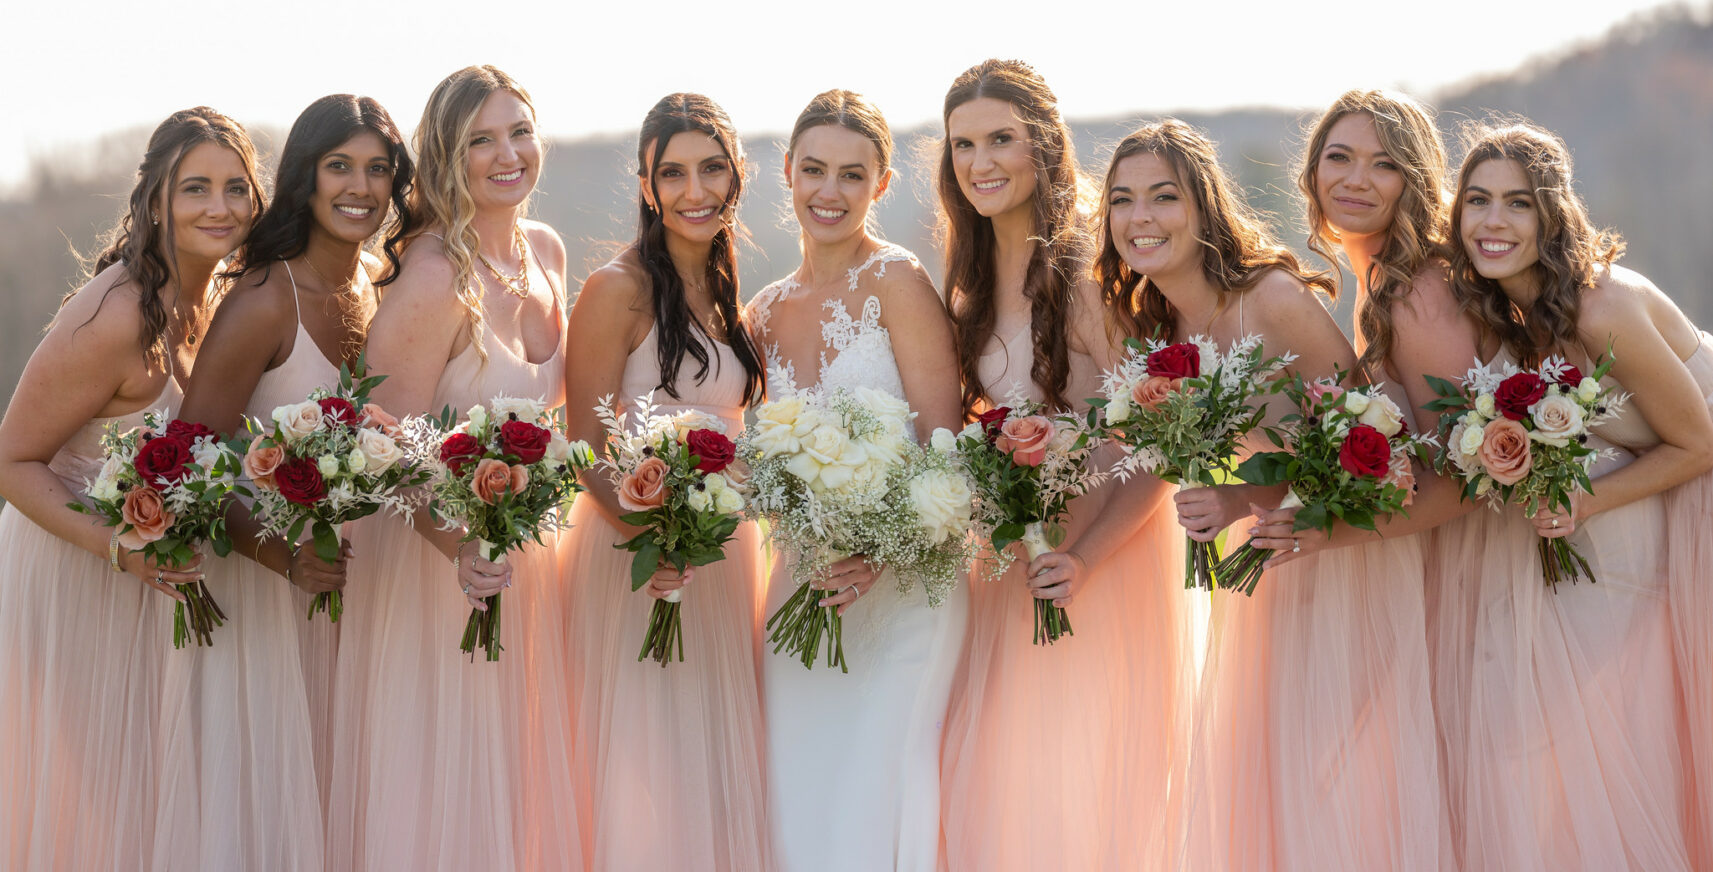 bridesmaids smiling with bouquet